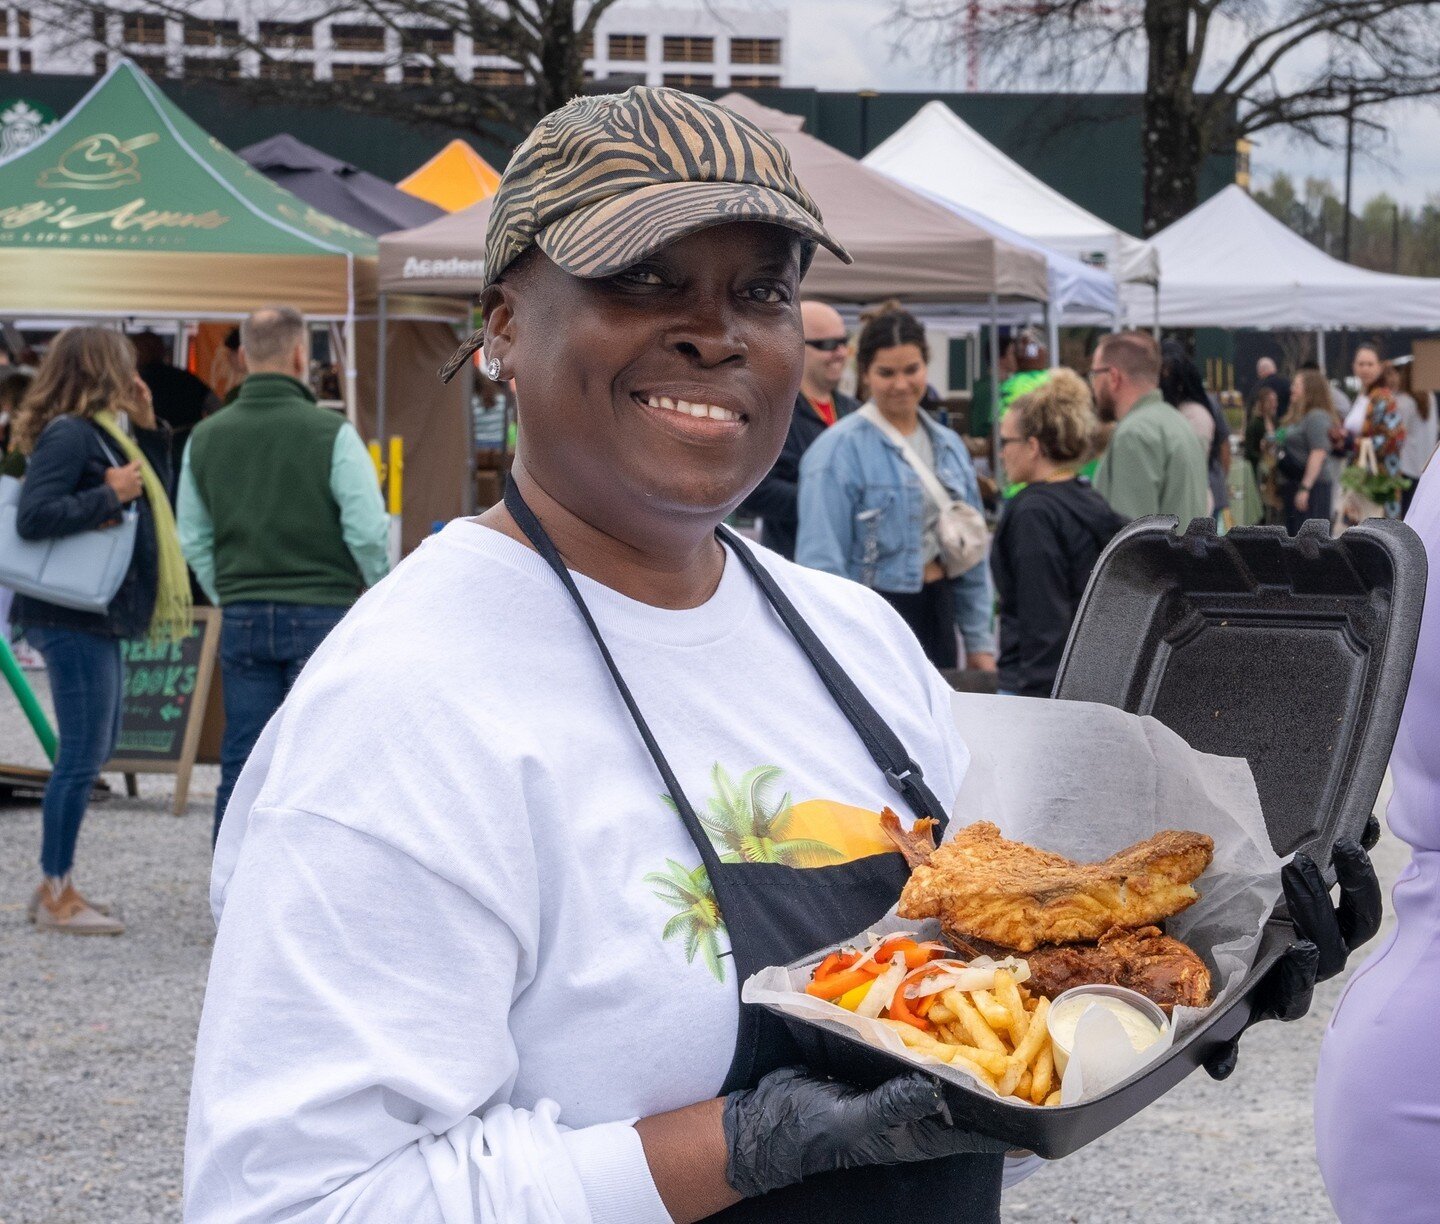 Happy Sunday!!! The Market at MidCity is from 12-4 PM! Fresh produce, eggs, plants, and more from local farmers, homemade goods and other items, art, LIVE music, delicious food and drinks, and more. 

LIVE music for 3/24
🎶Ty Blackwell at 12 PM
🎶The